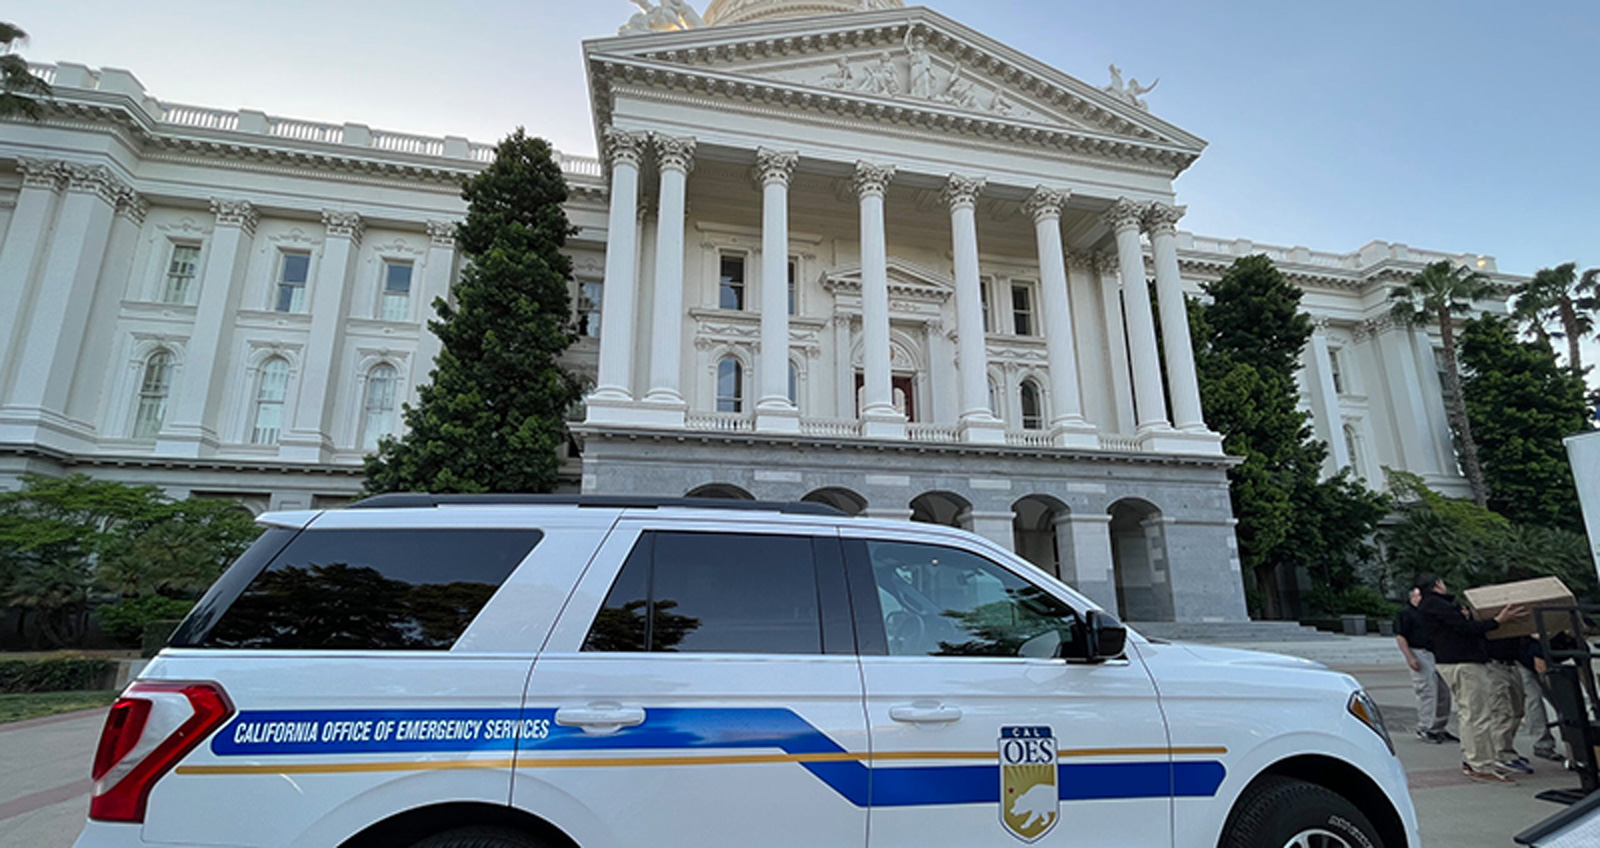 Cal OES vehicle at state capital